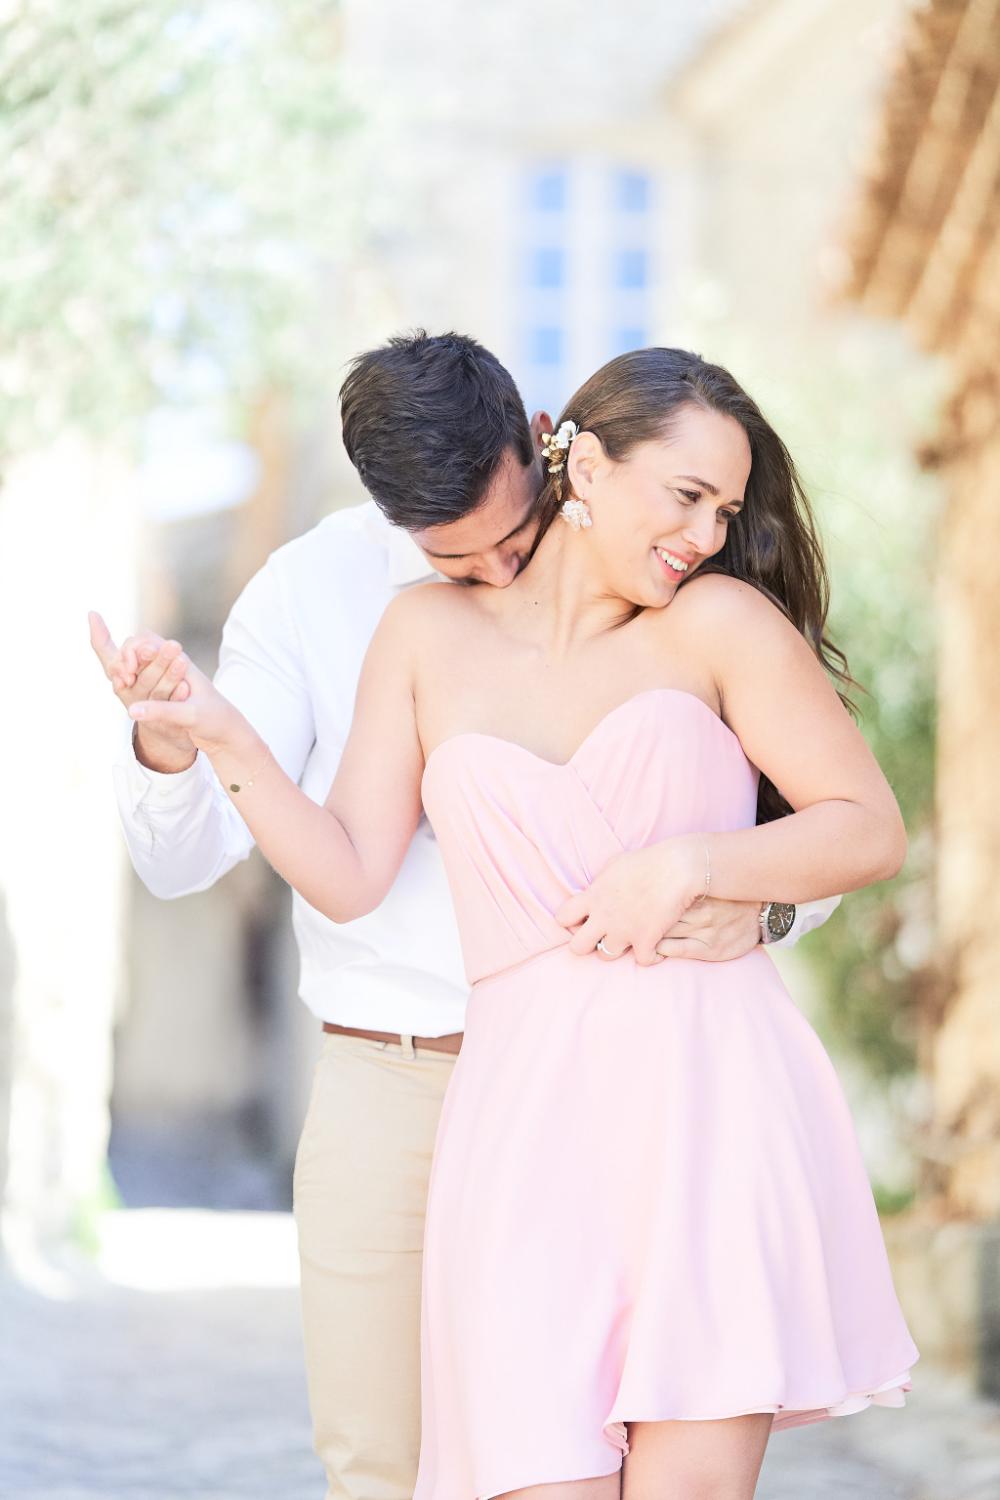 How To Plan A Beautiful Engagement Shoot In Gordes, Provence